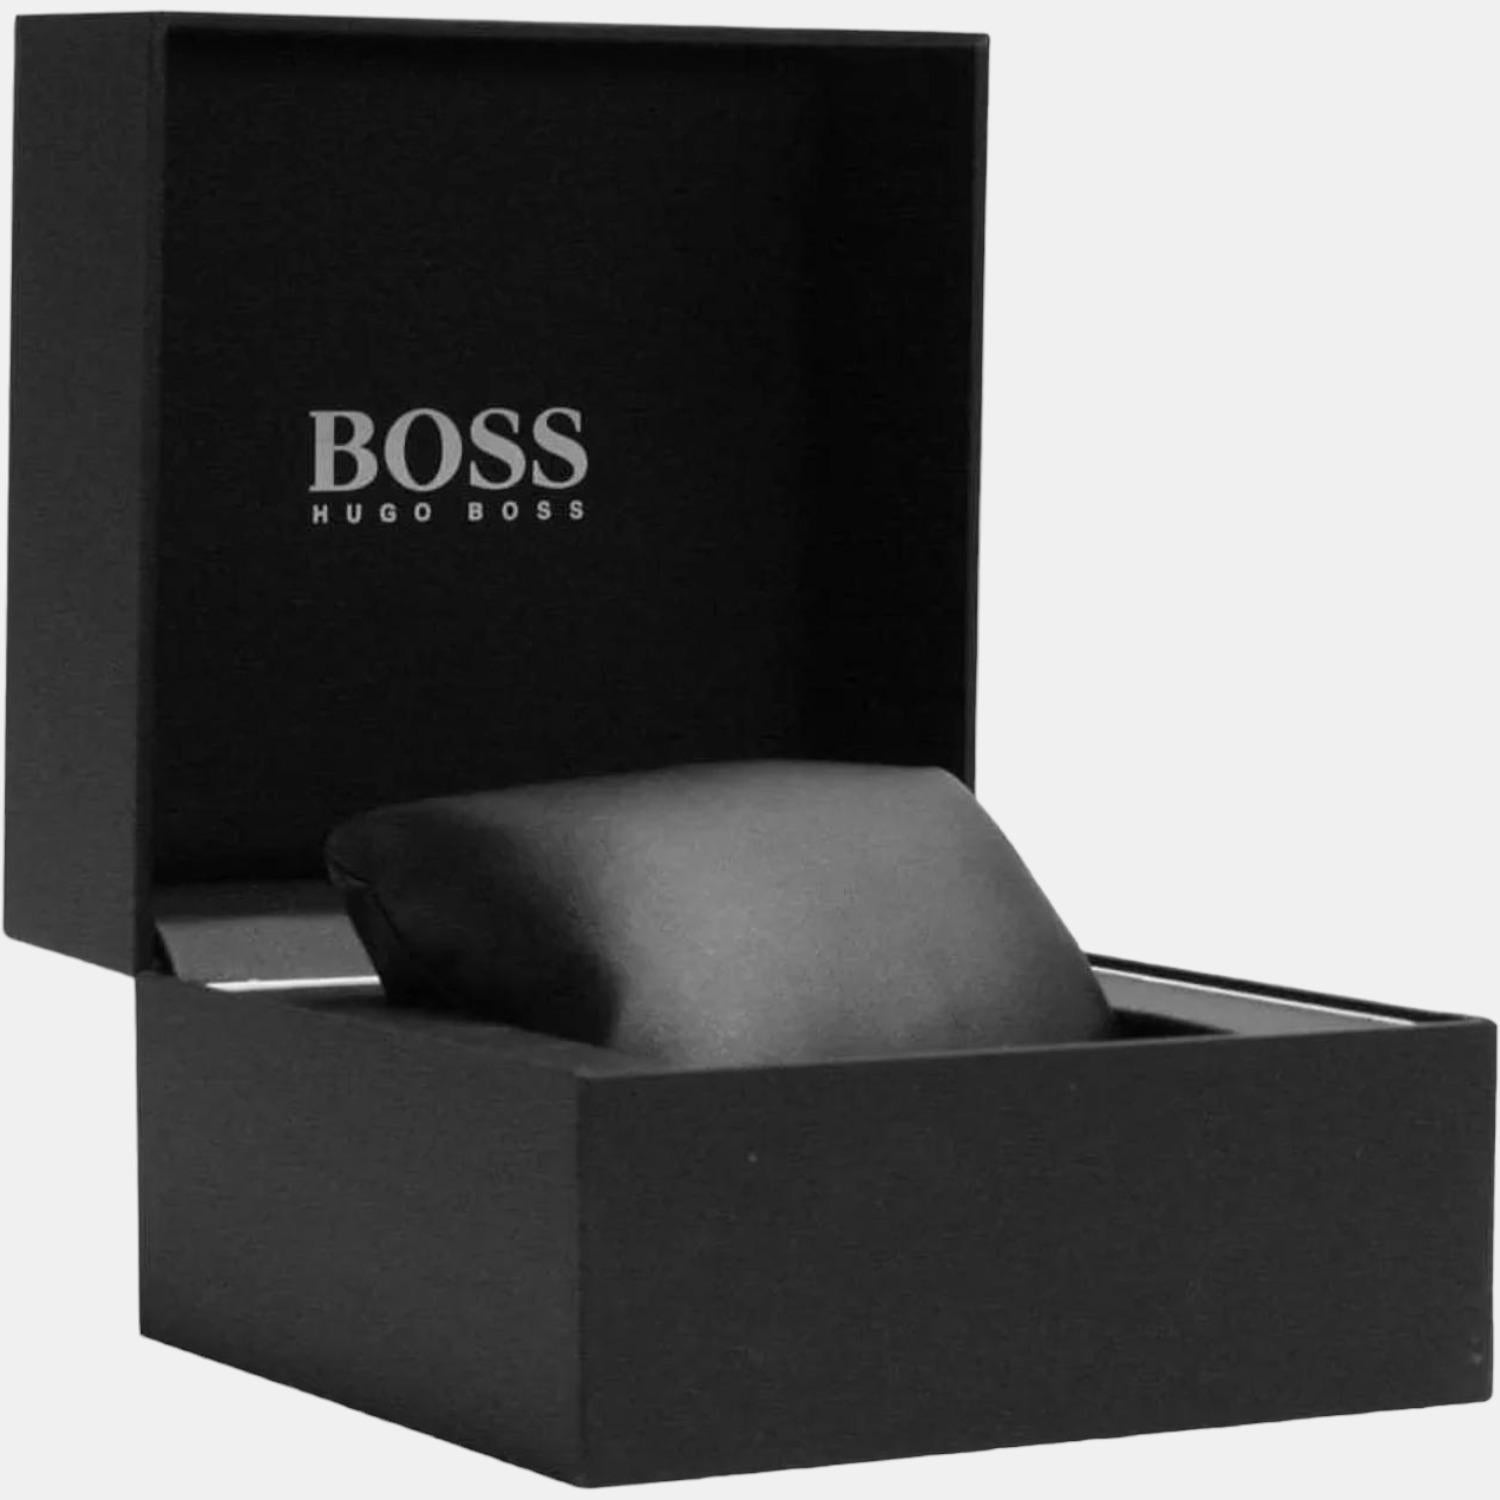 Analog Stainless Watch – | Time In Steel Unisex Boss Just Boss Black